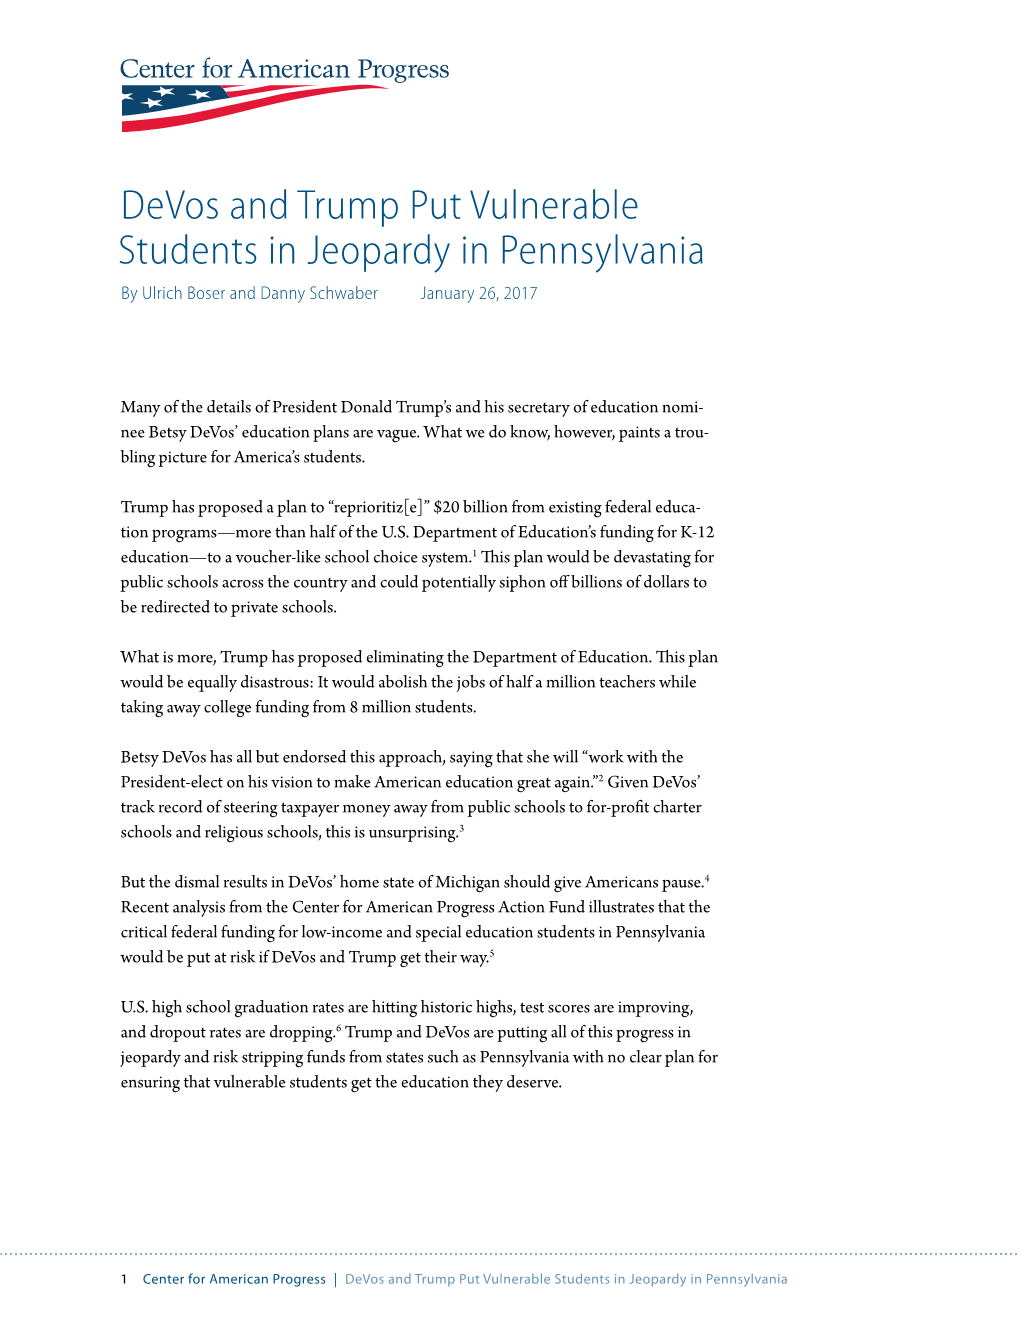 Devos and Trump Put Vulnerable Students in Jeopardy in Pennsylvania by Ulrich Boser and Danny Schwaber January 26, 2017